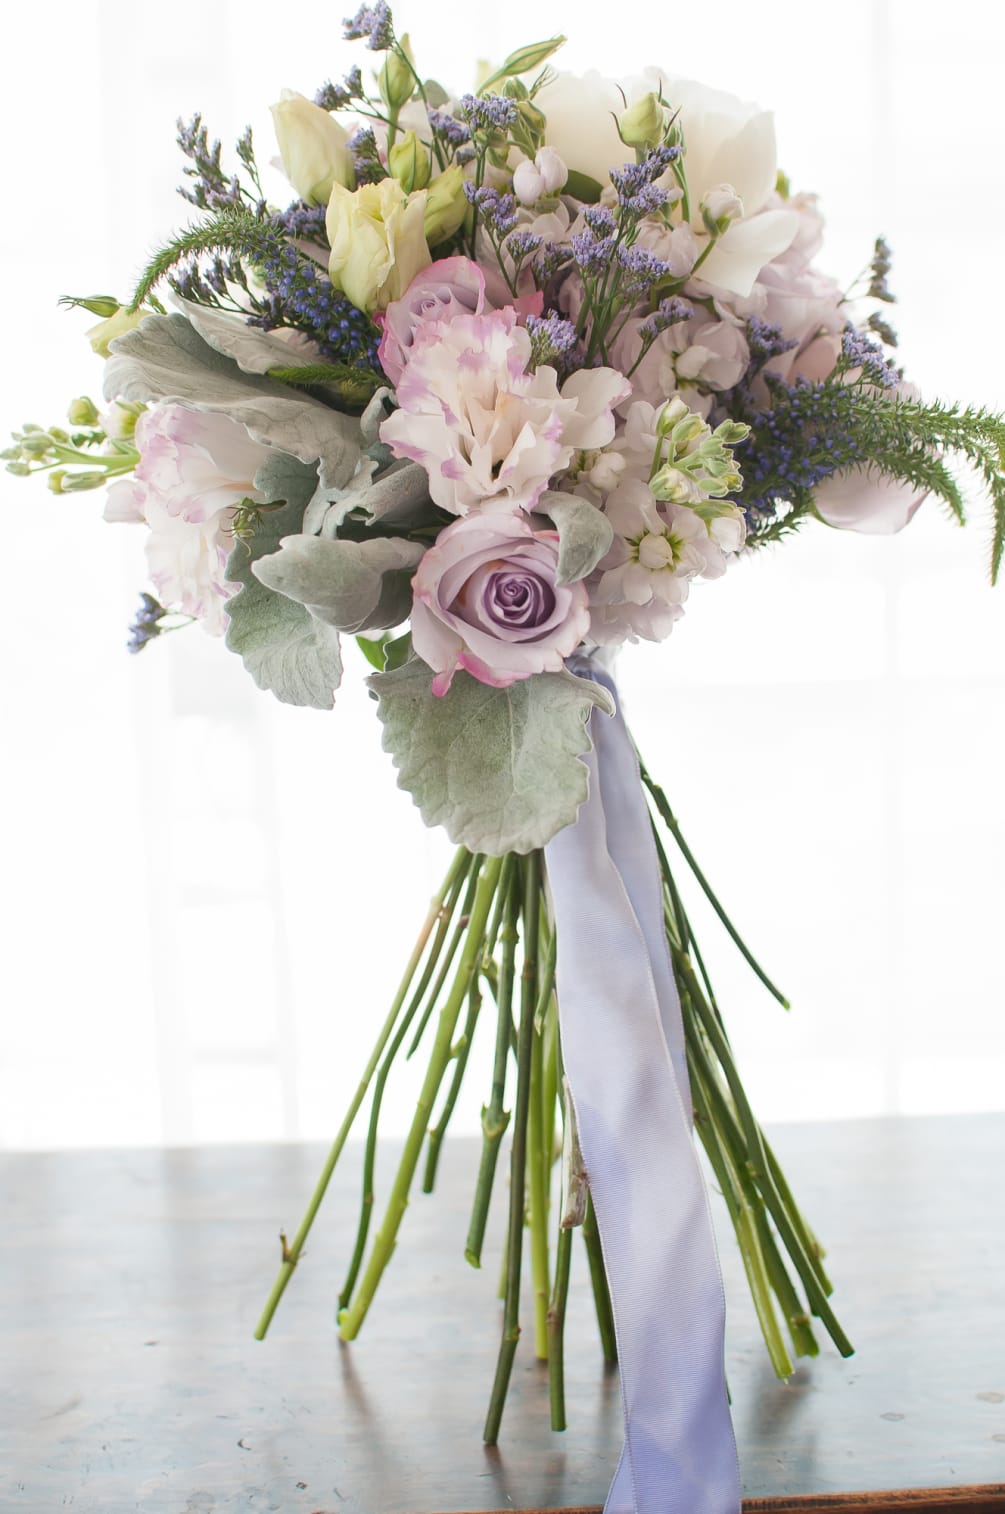 Gorgeous mix of lavender flowers including misty, roses, stock, and dusty miller.